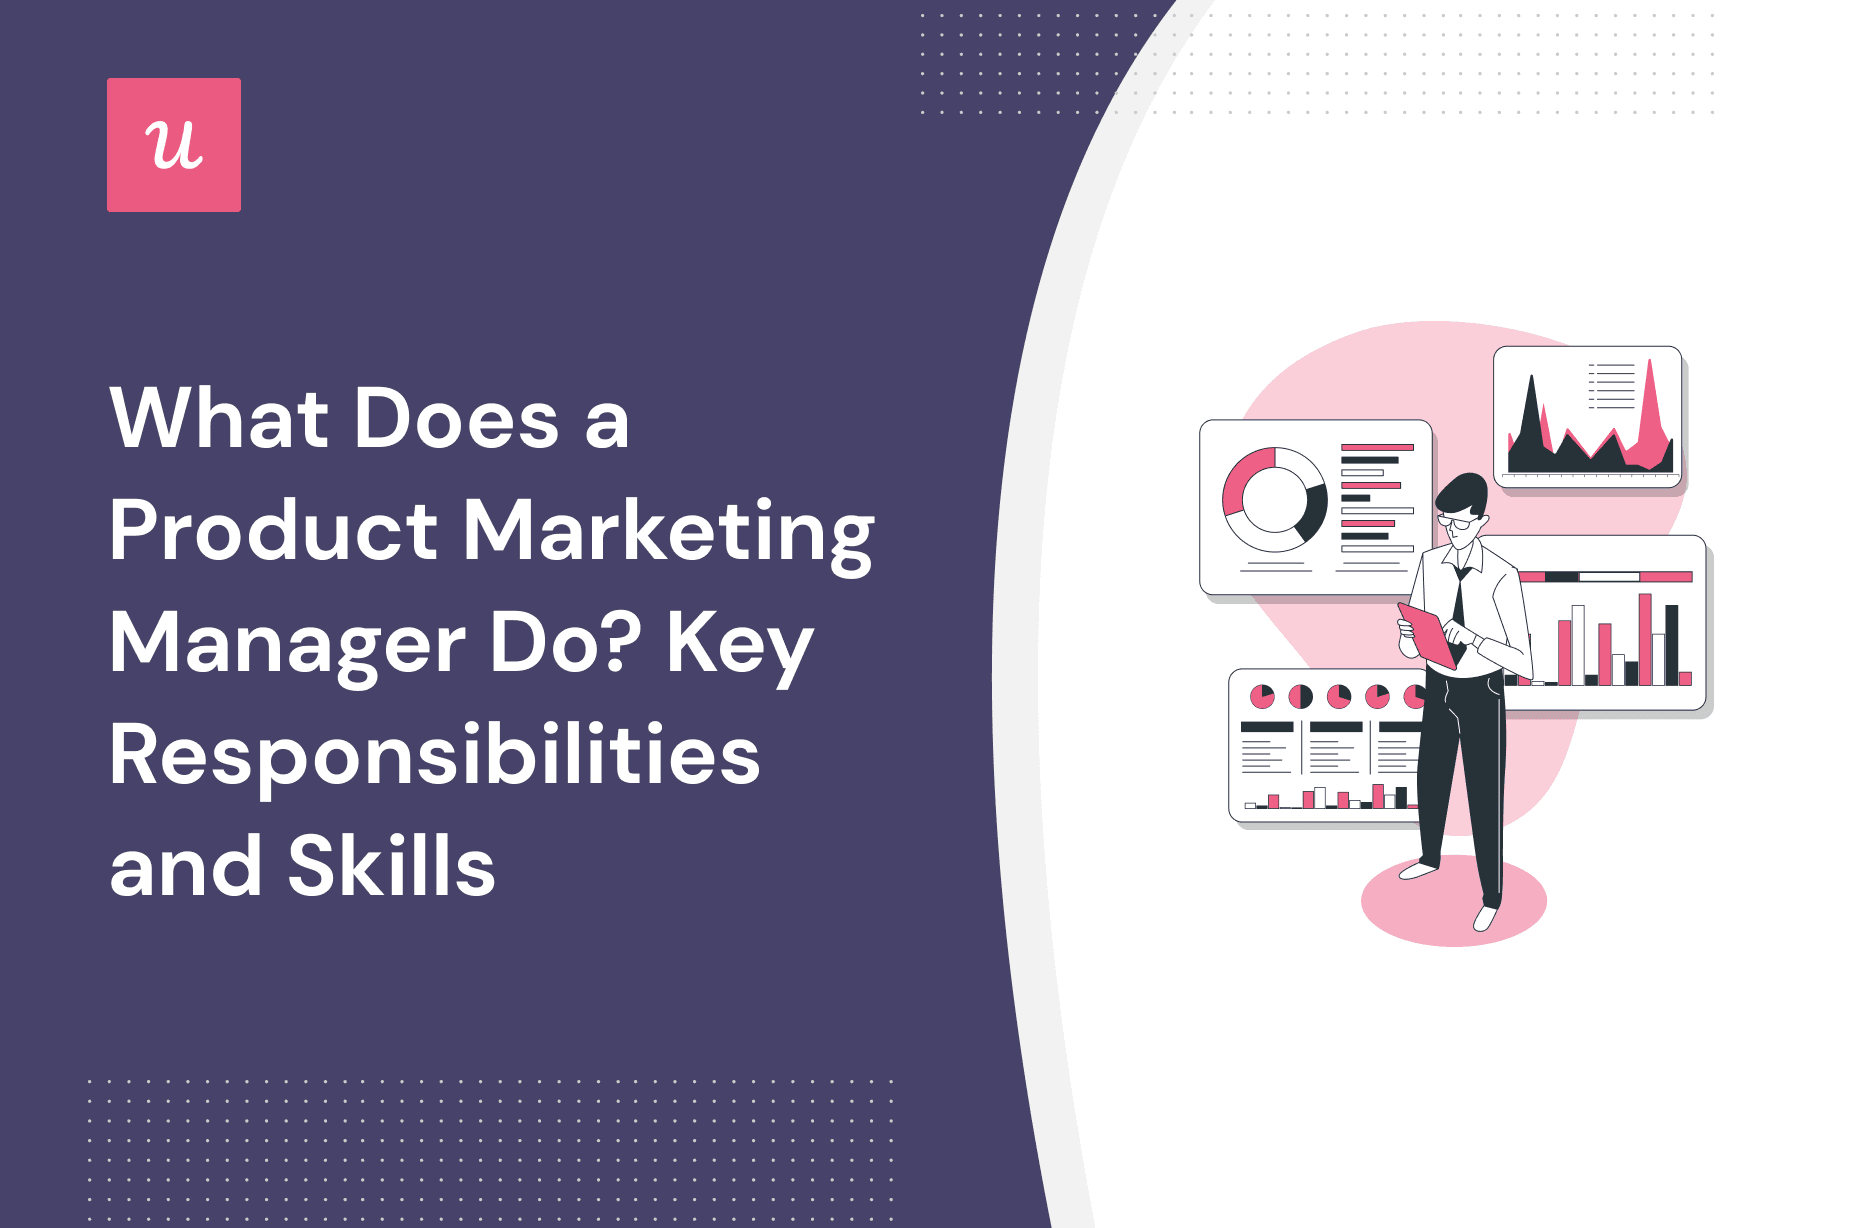 What Does a Product Marketing Manager Do? 8 Key Responsibilities cover